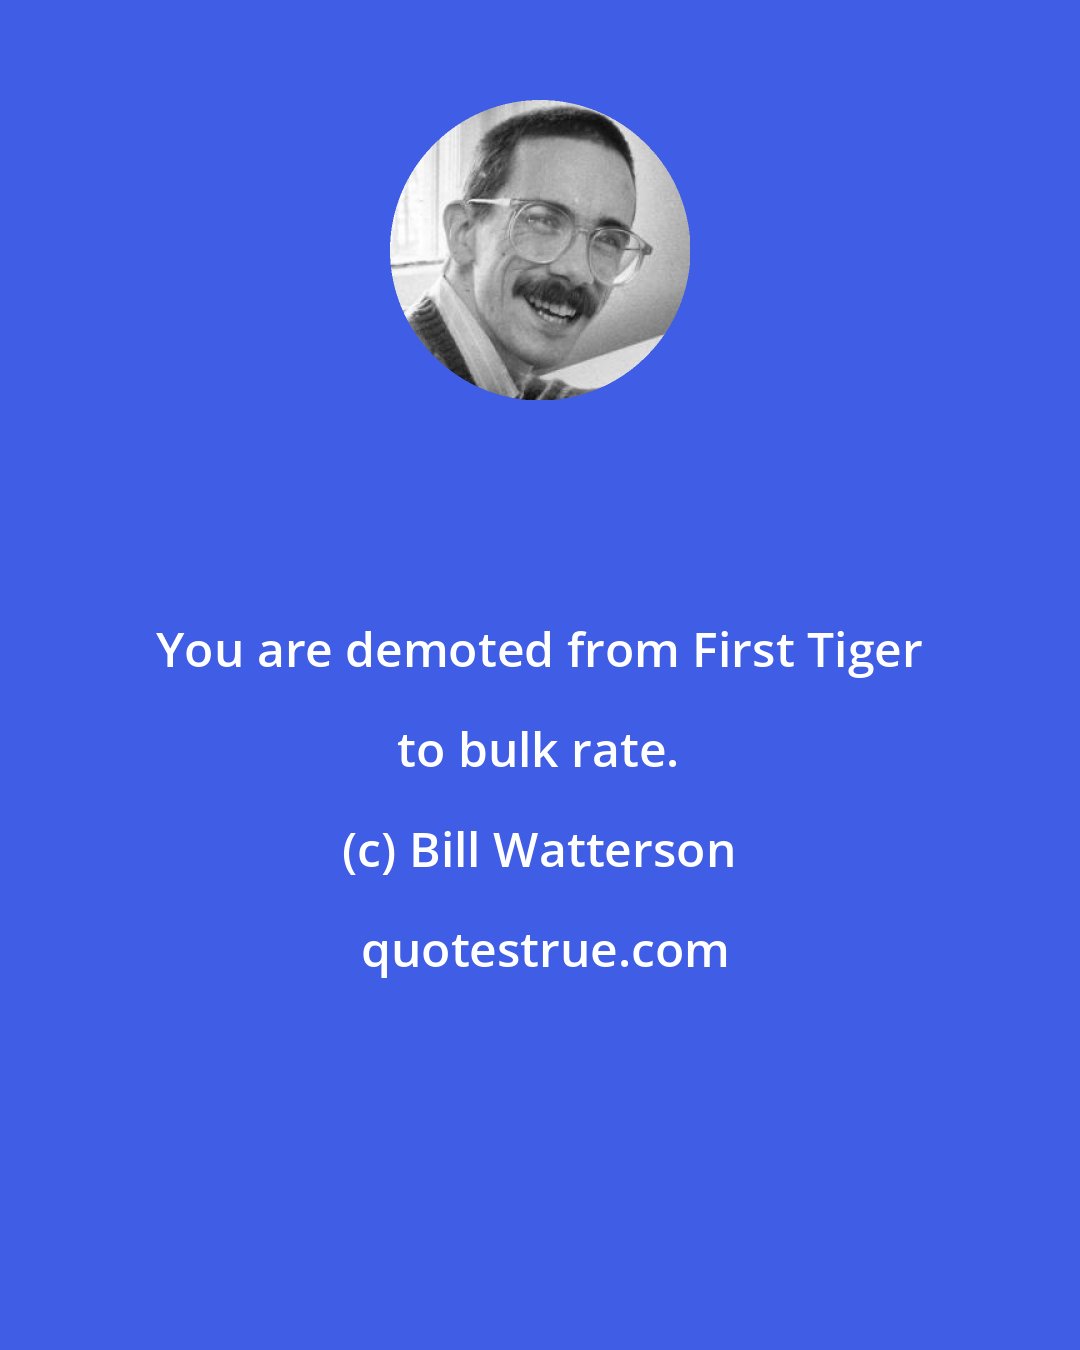 Bill Watterson: You are demoted from First Tiger to bulk rate.